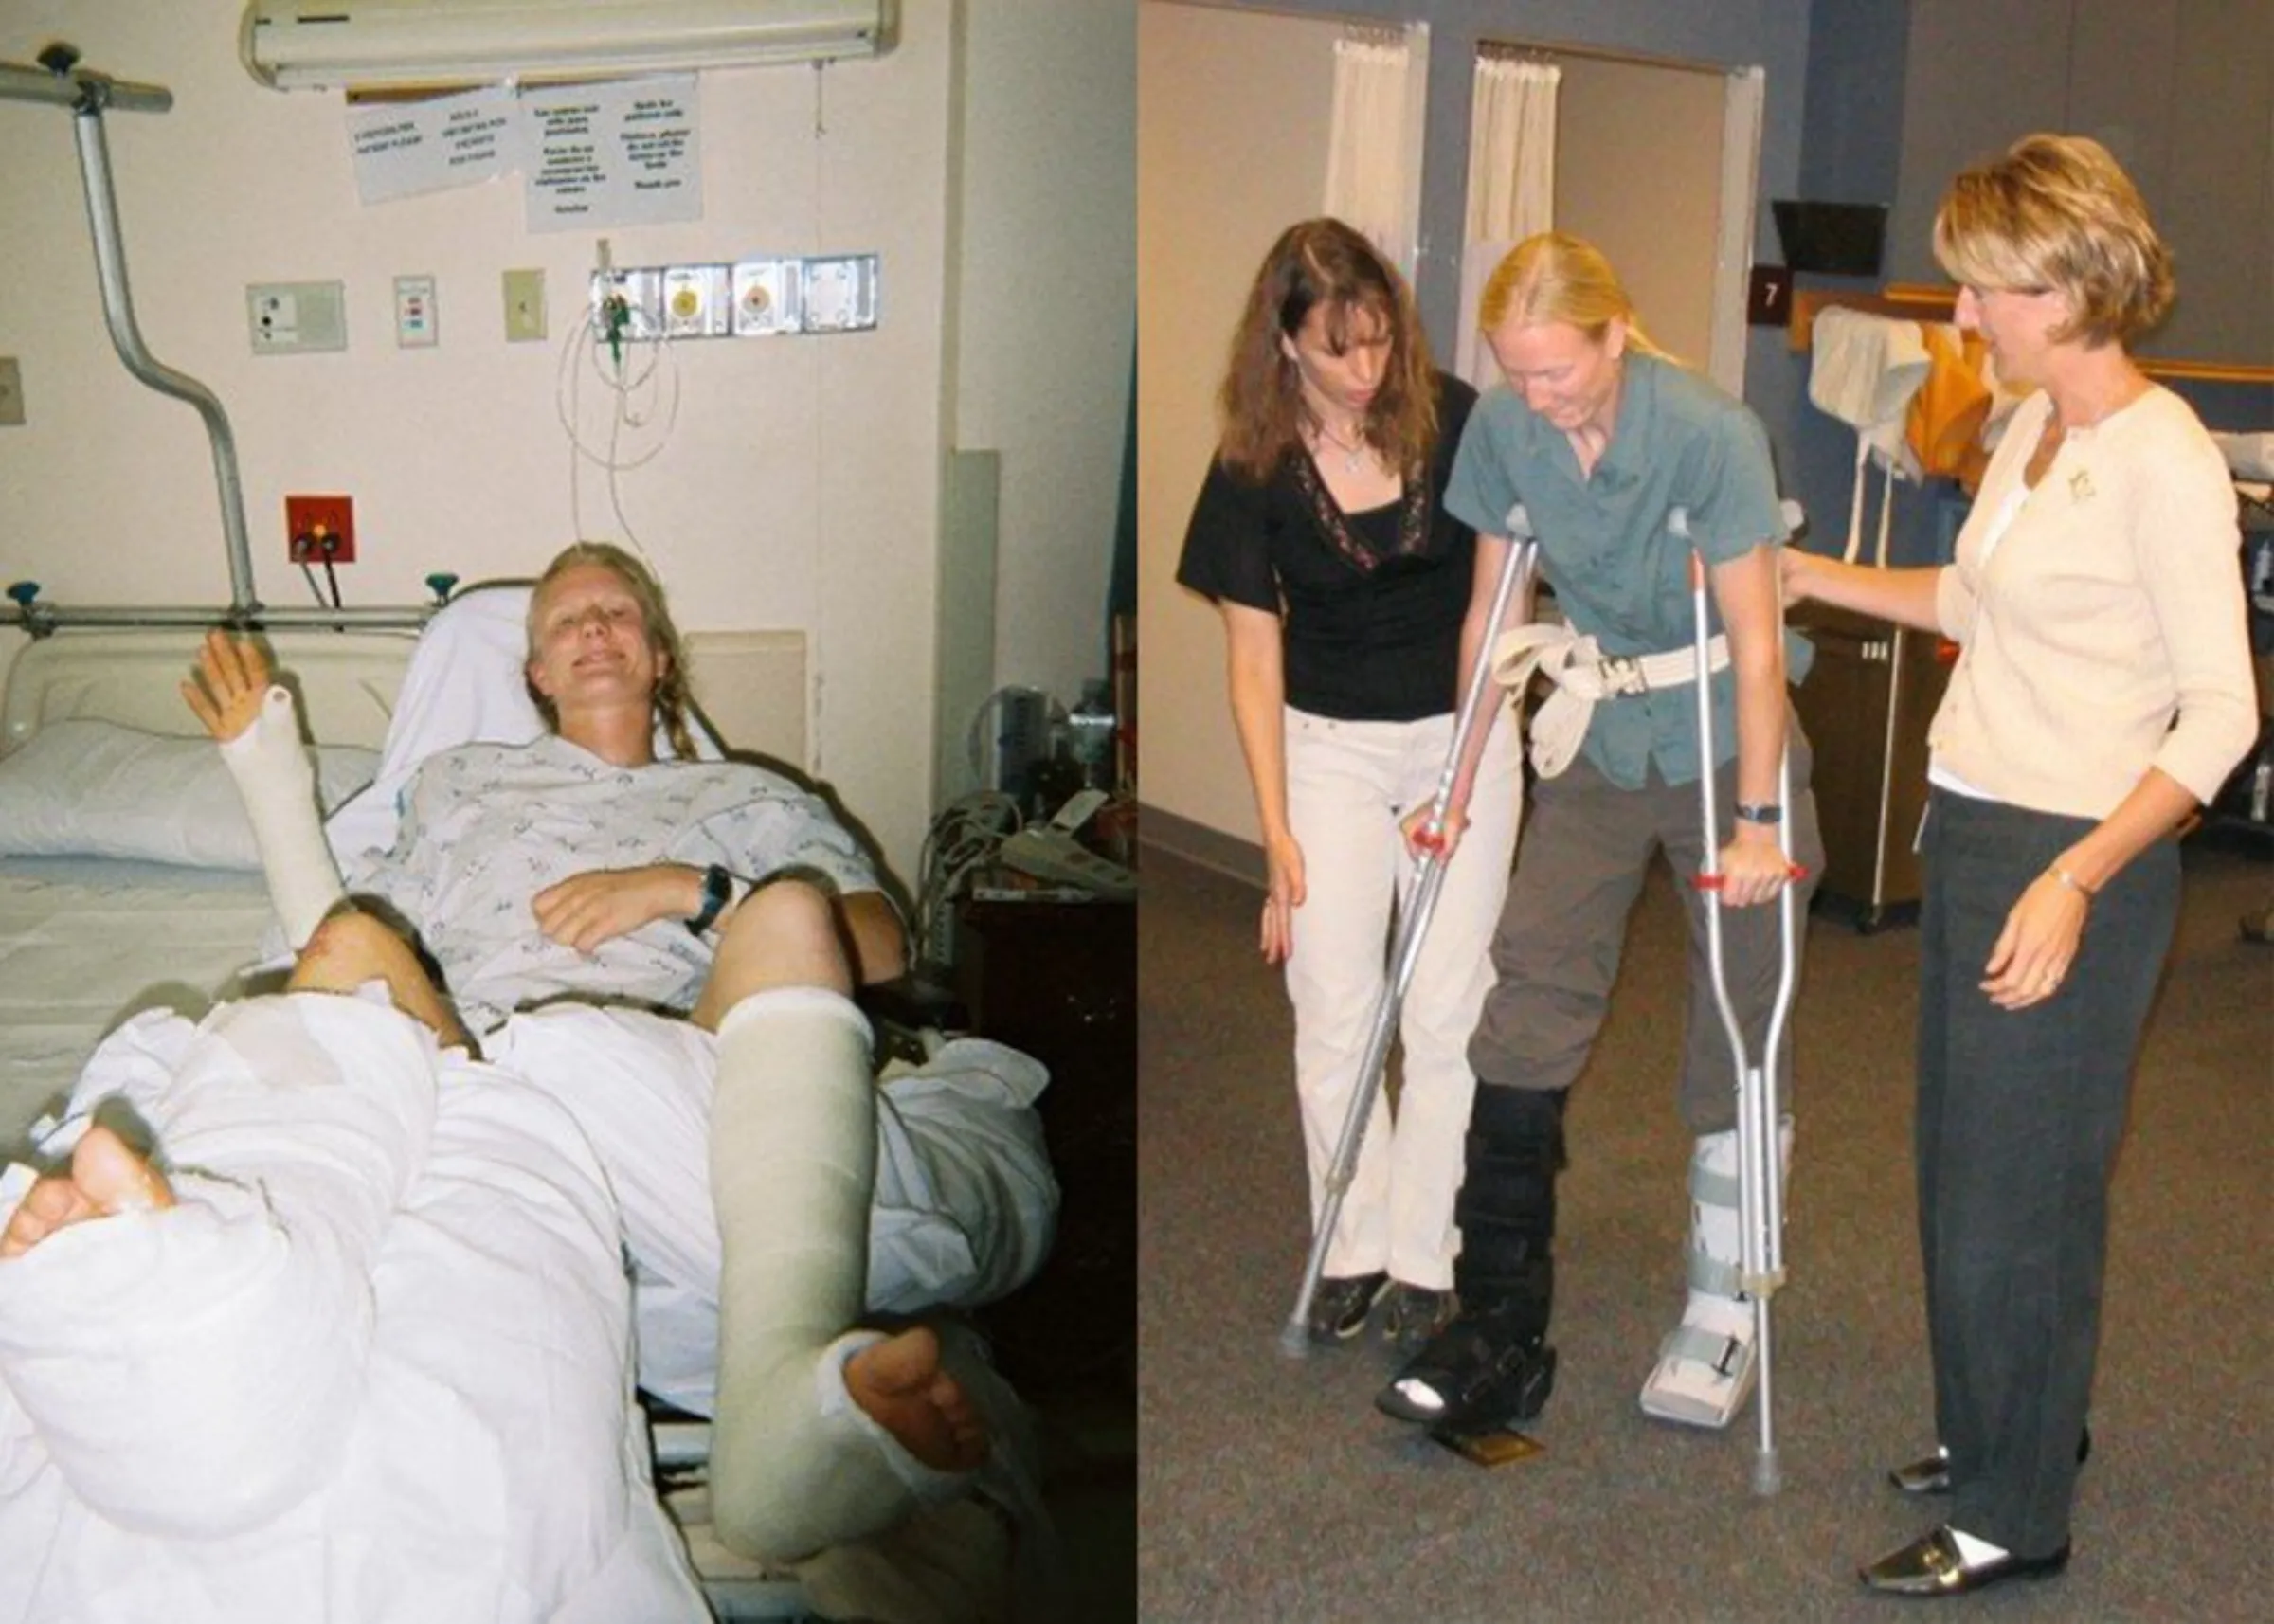 A composite photo shows former firefighter Sara Brown (left) in a hospital bed and (right) walking on crutches, after breaking both legs parachuting into New Mexico to fight a fire in 2007, in this undated photo.